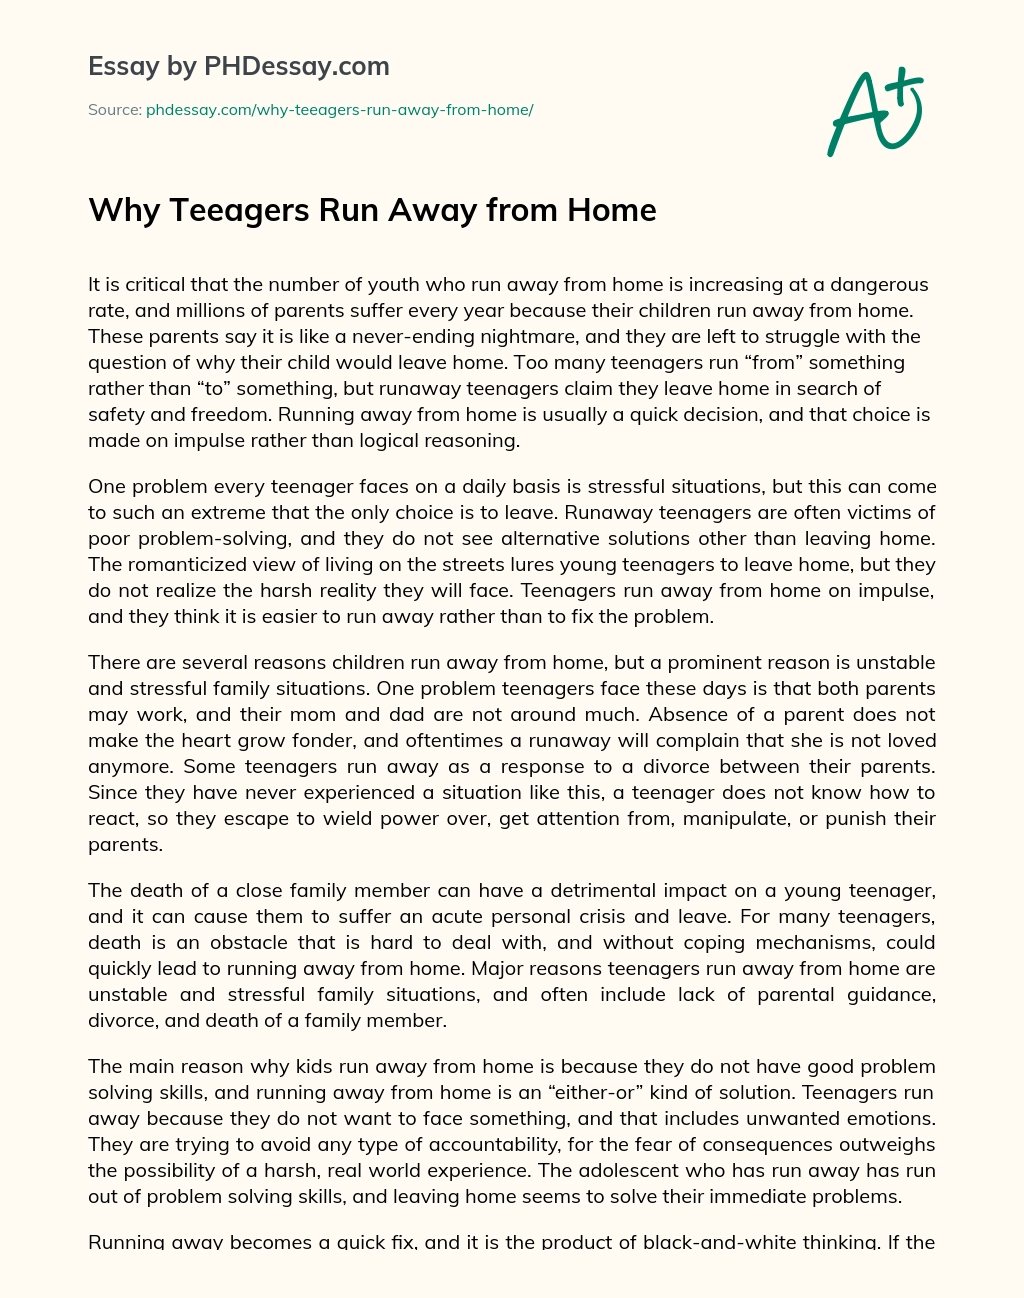 Why Teeagers Run Away from Home essay